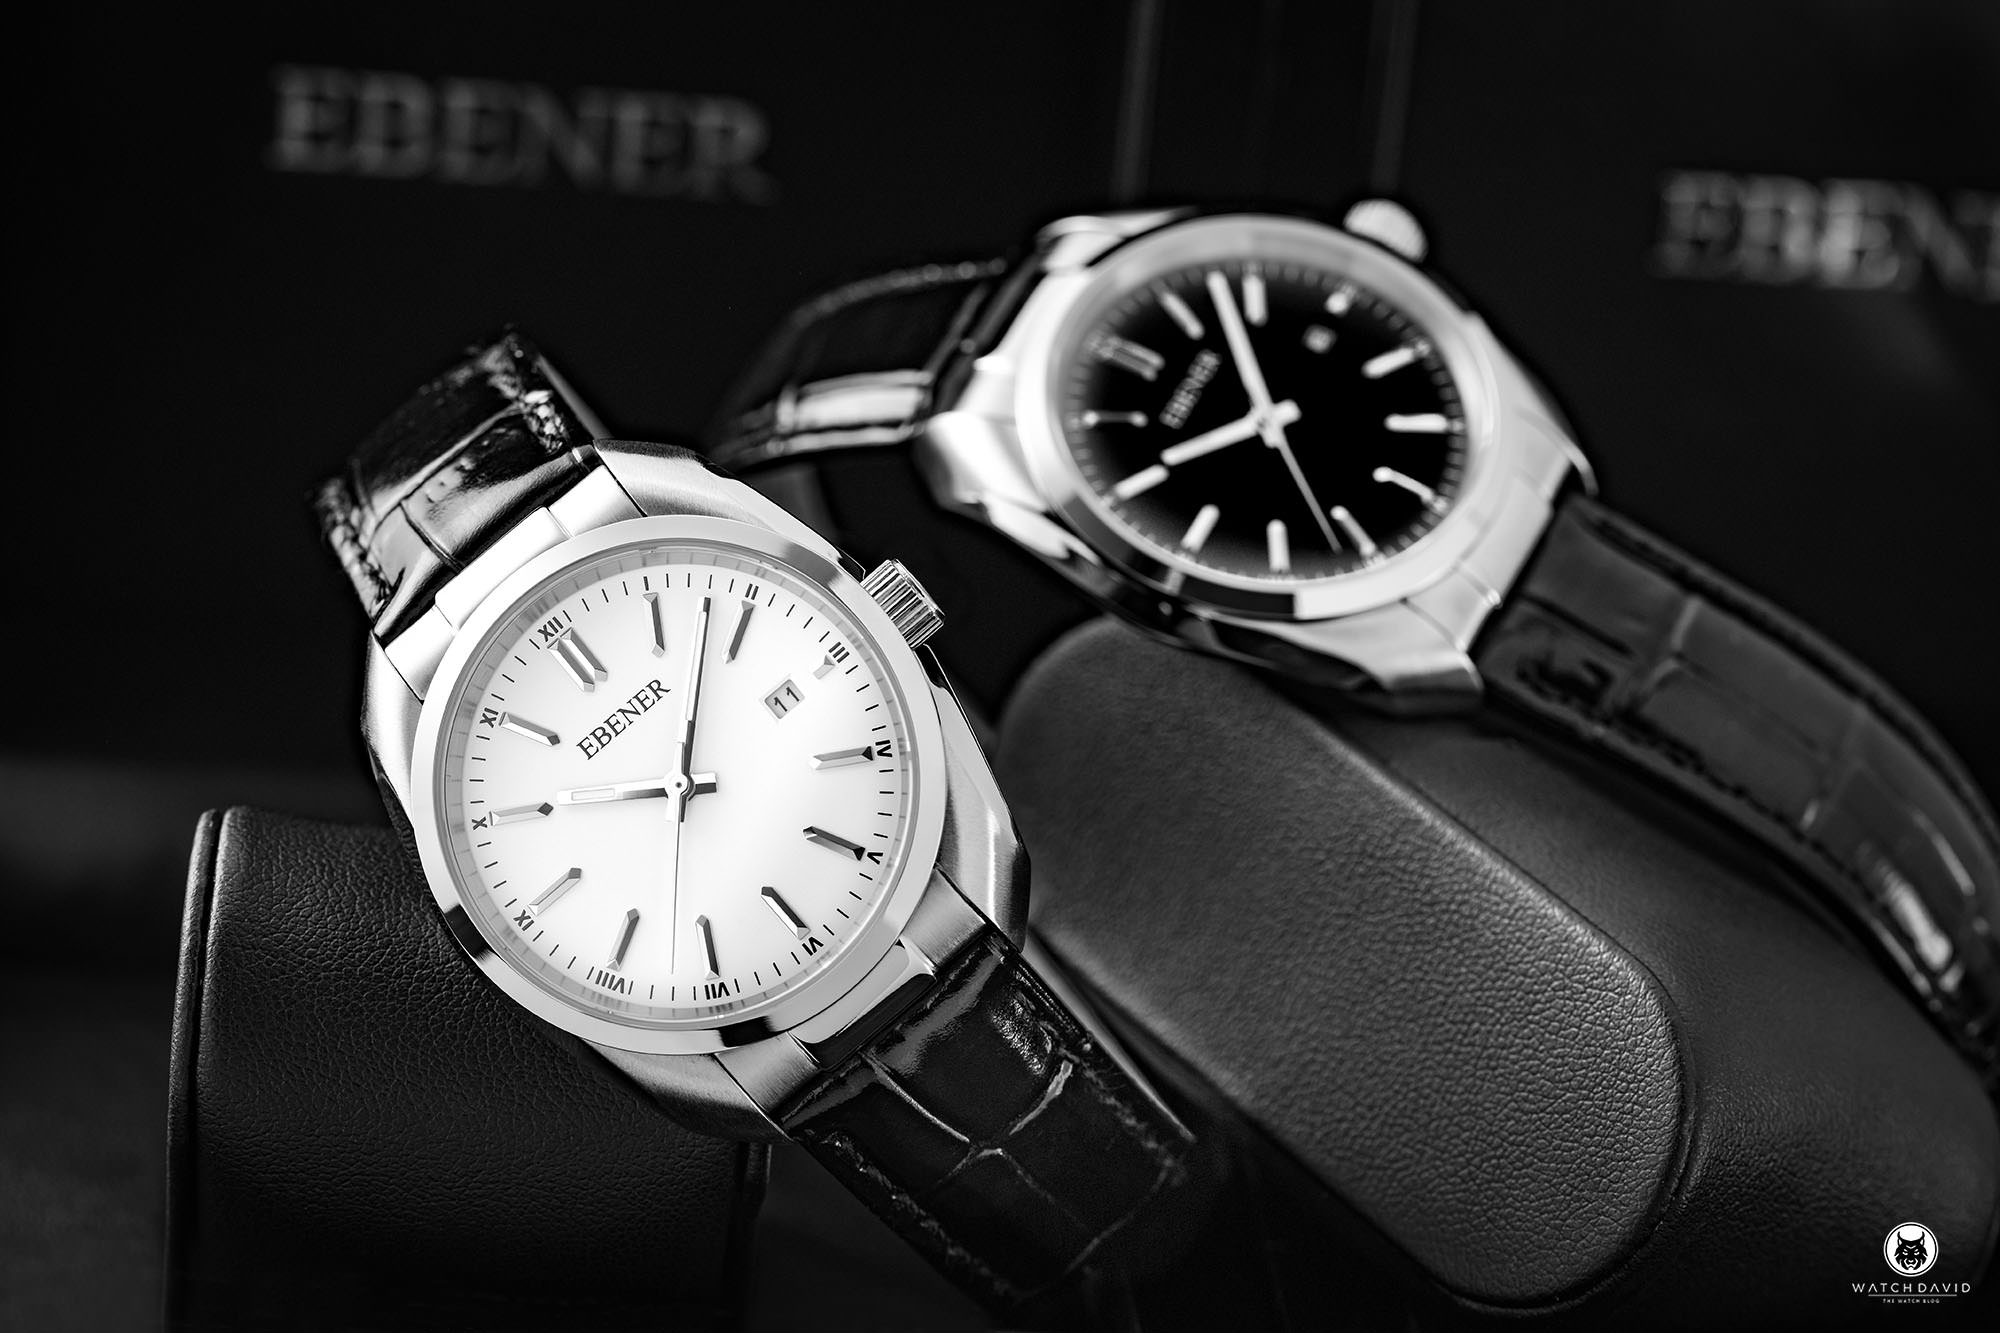 Ebener The First White Limited Edition